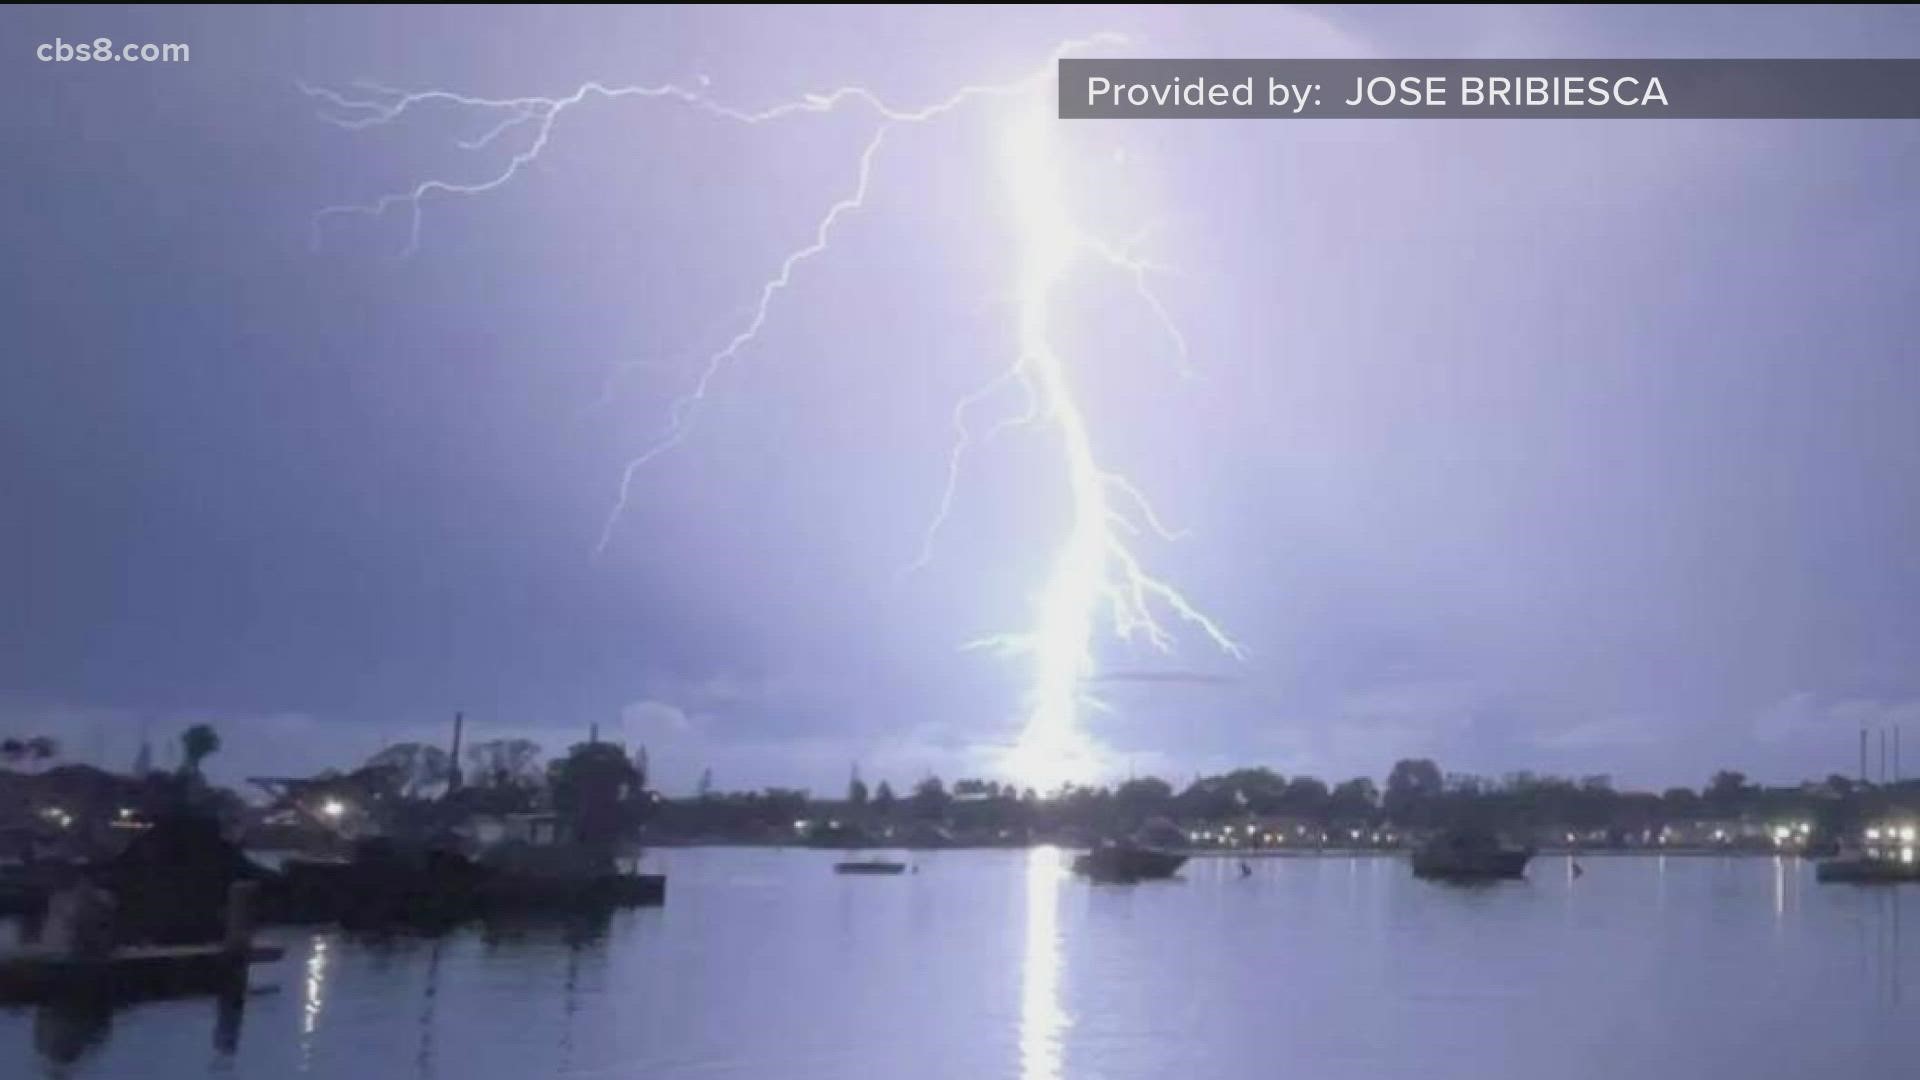 Long periods of dry weather are followed by extreme storms with powerful lighting strikes.